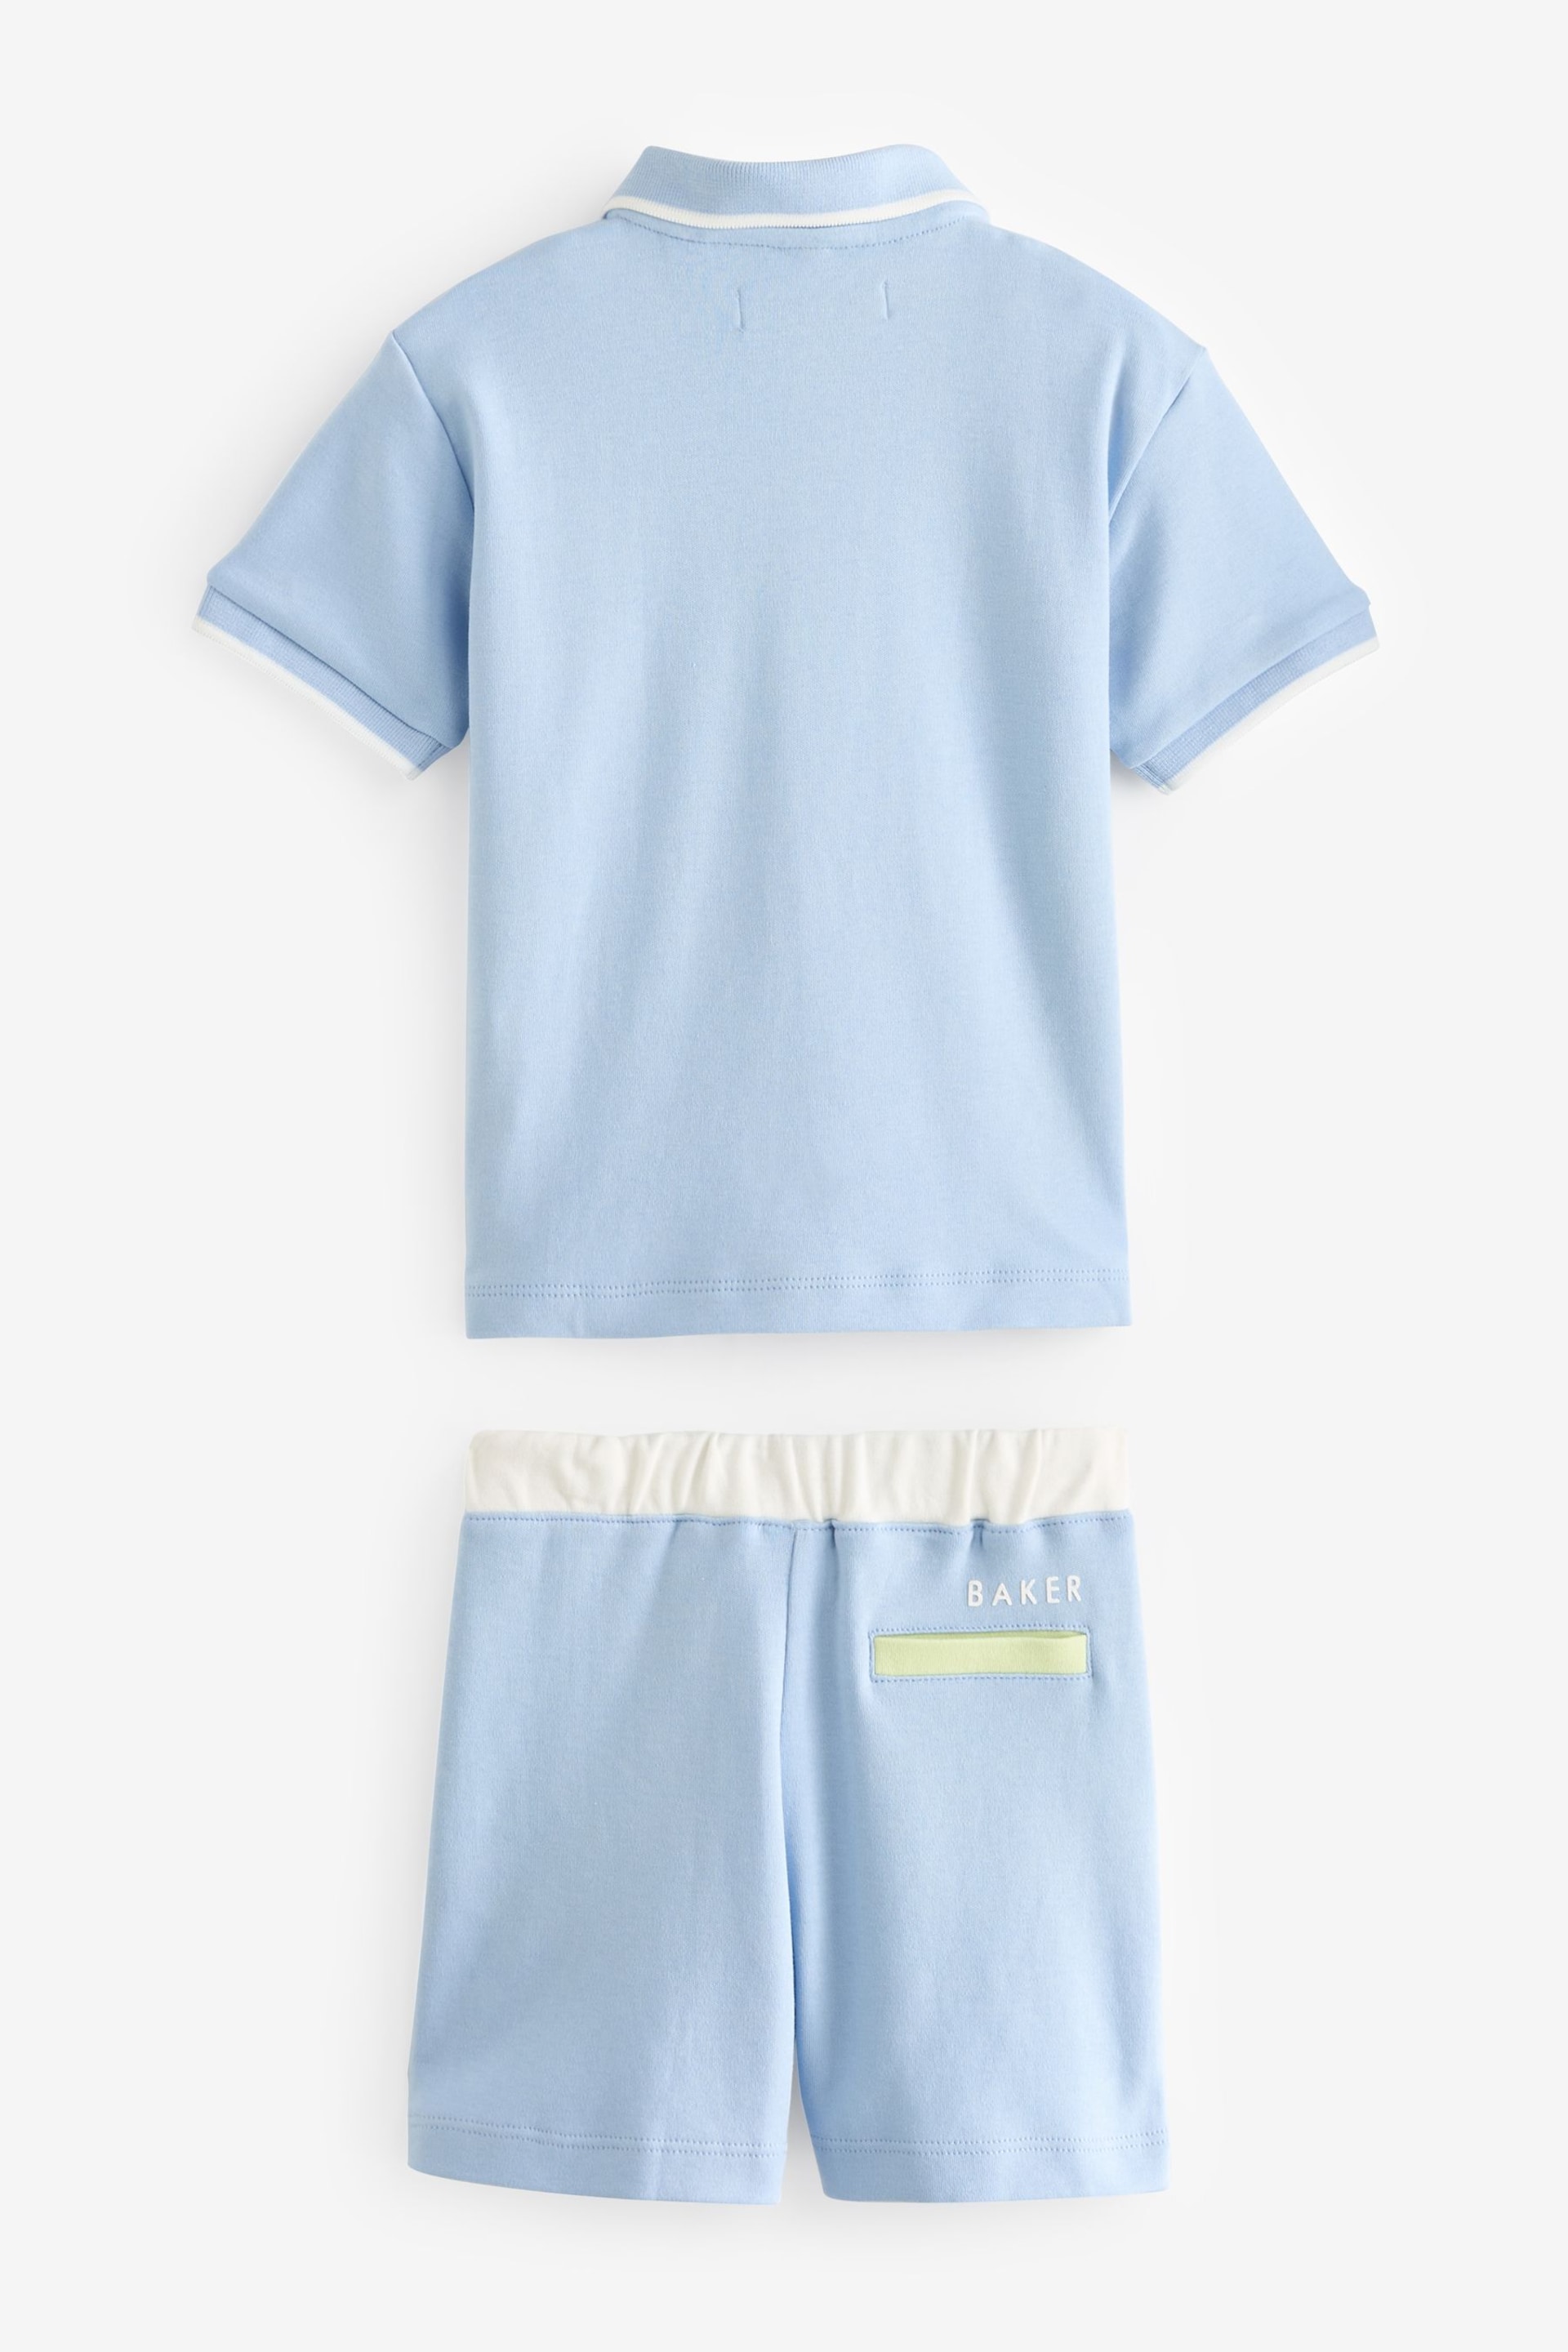 Baker by Ted Baker Colourblock Polo Shirt and Short Set - Image 9 of 12